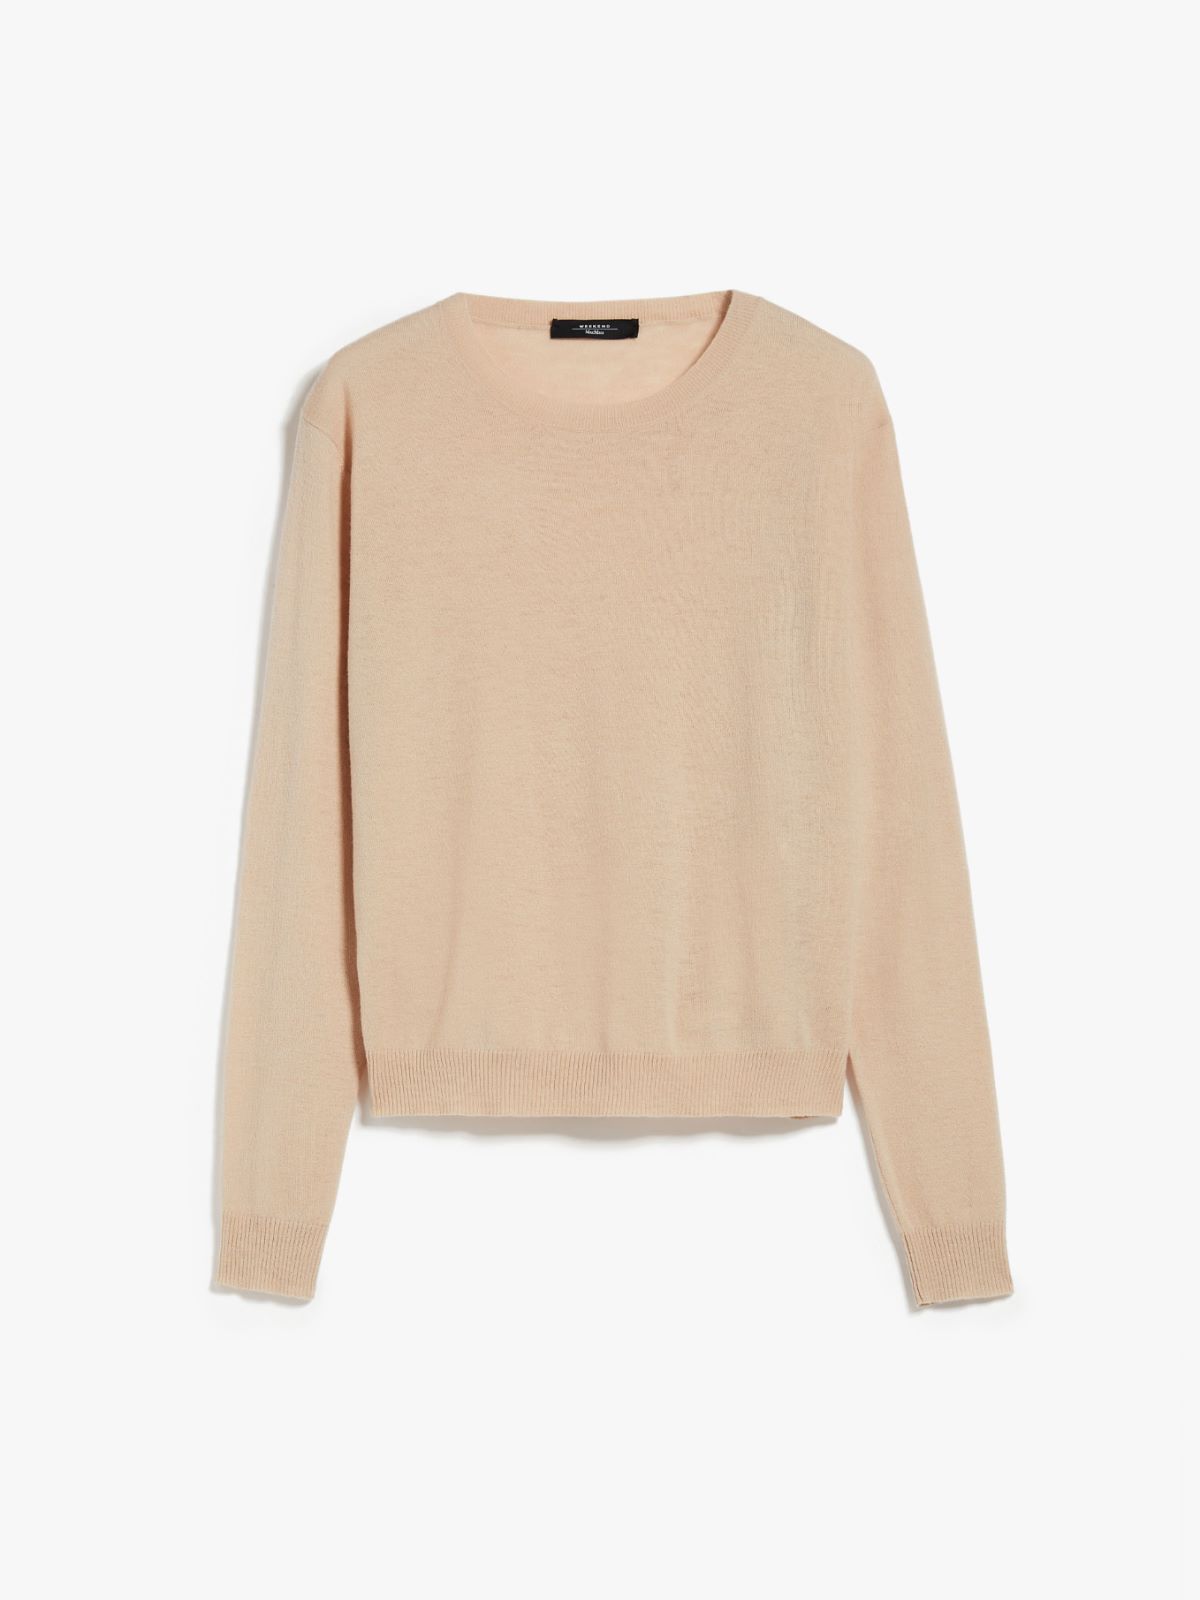 Wool and cashmere crew-neck sweater - HONEY - Weekend Max Mara - 6